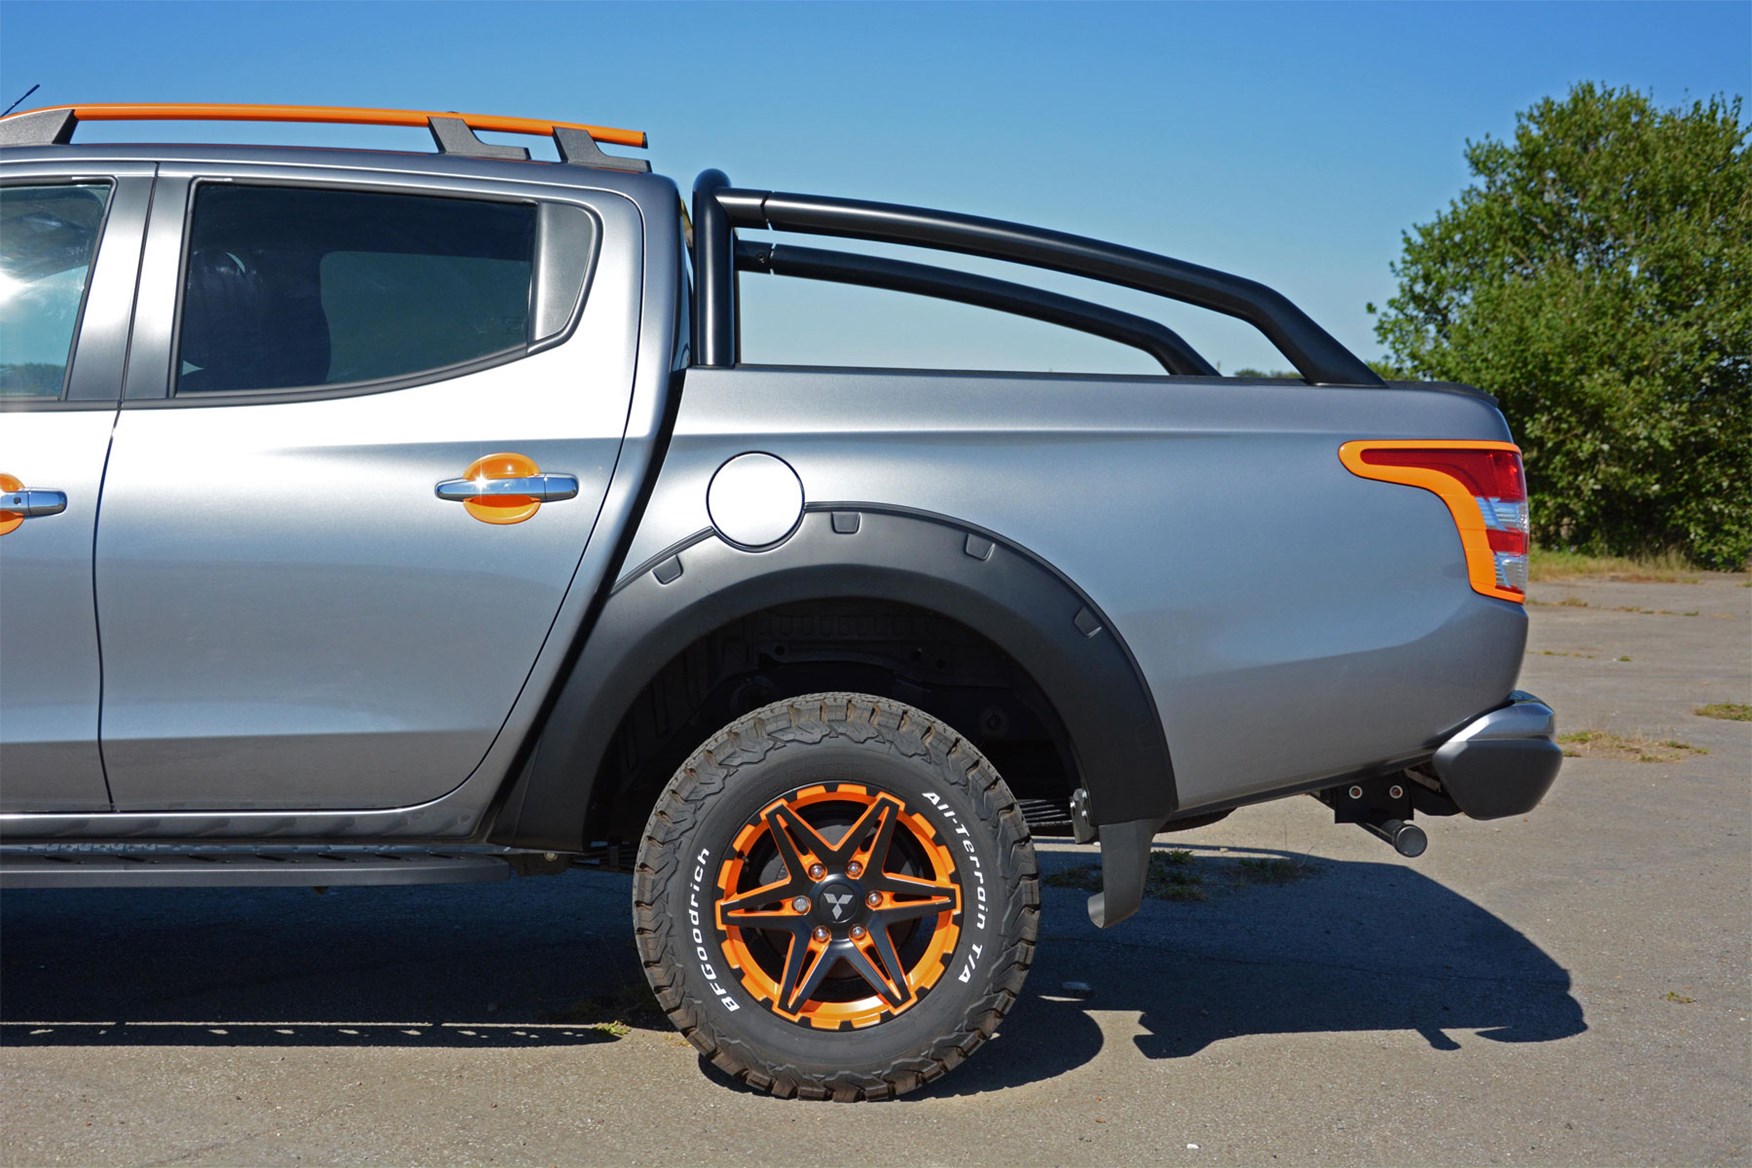 Mitsubishi L200 Barbarian SVP II review - rear side detail showing wheels, tyres, arch extensions, light surrounds